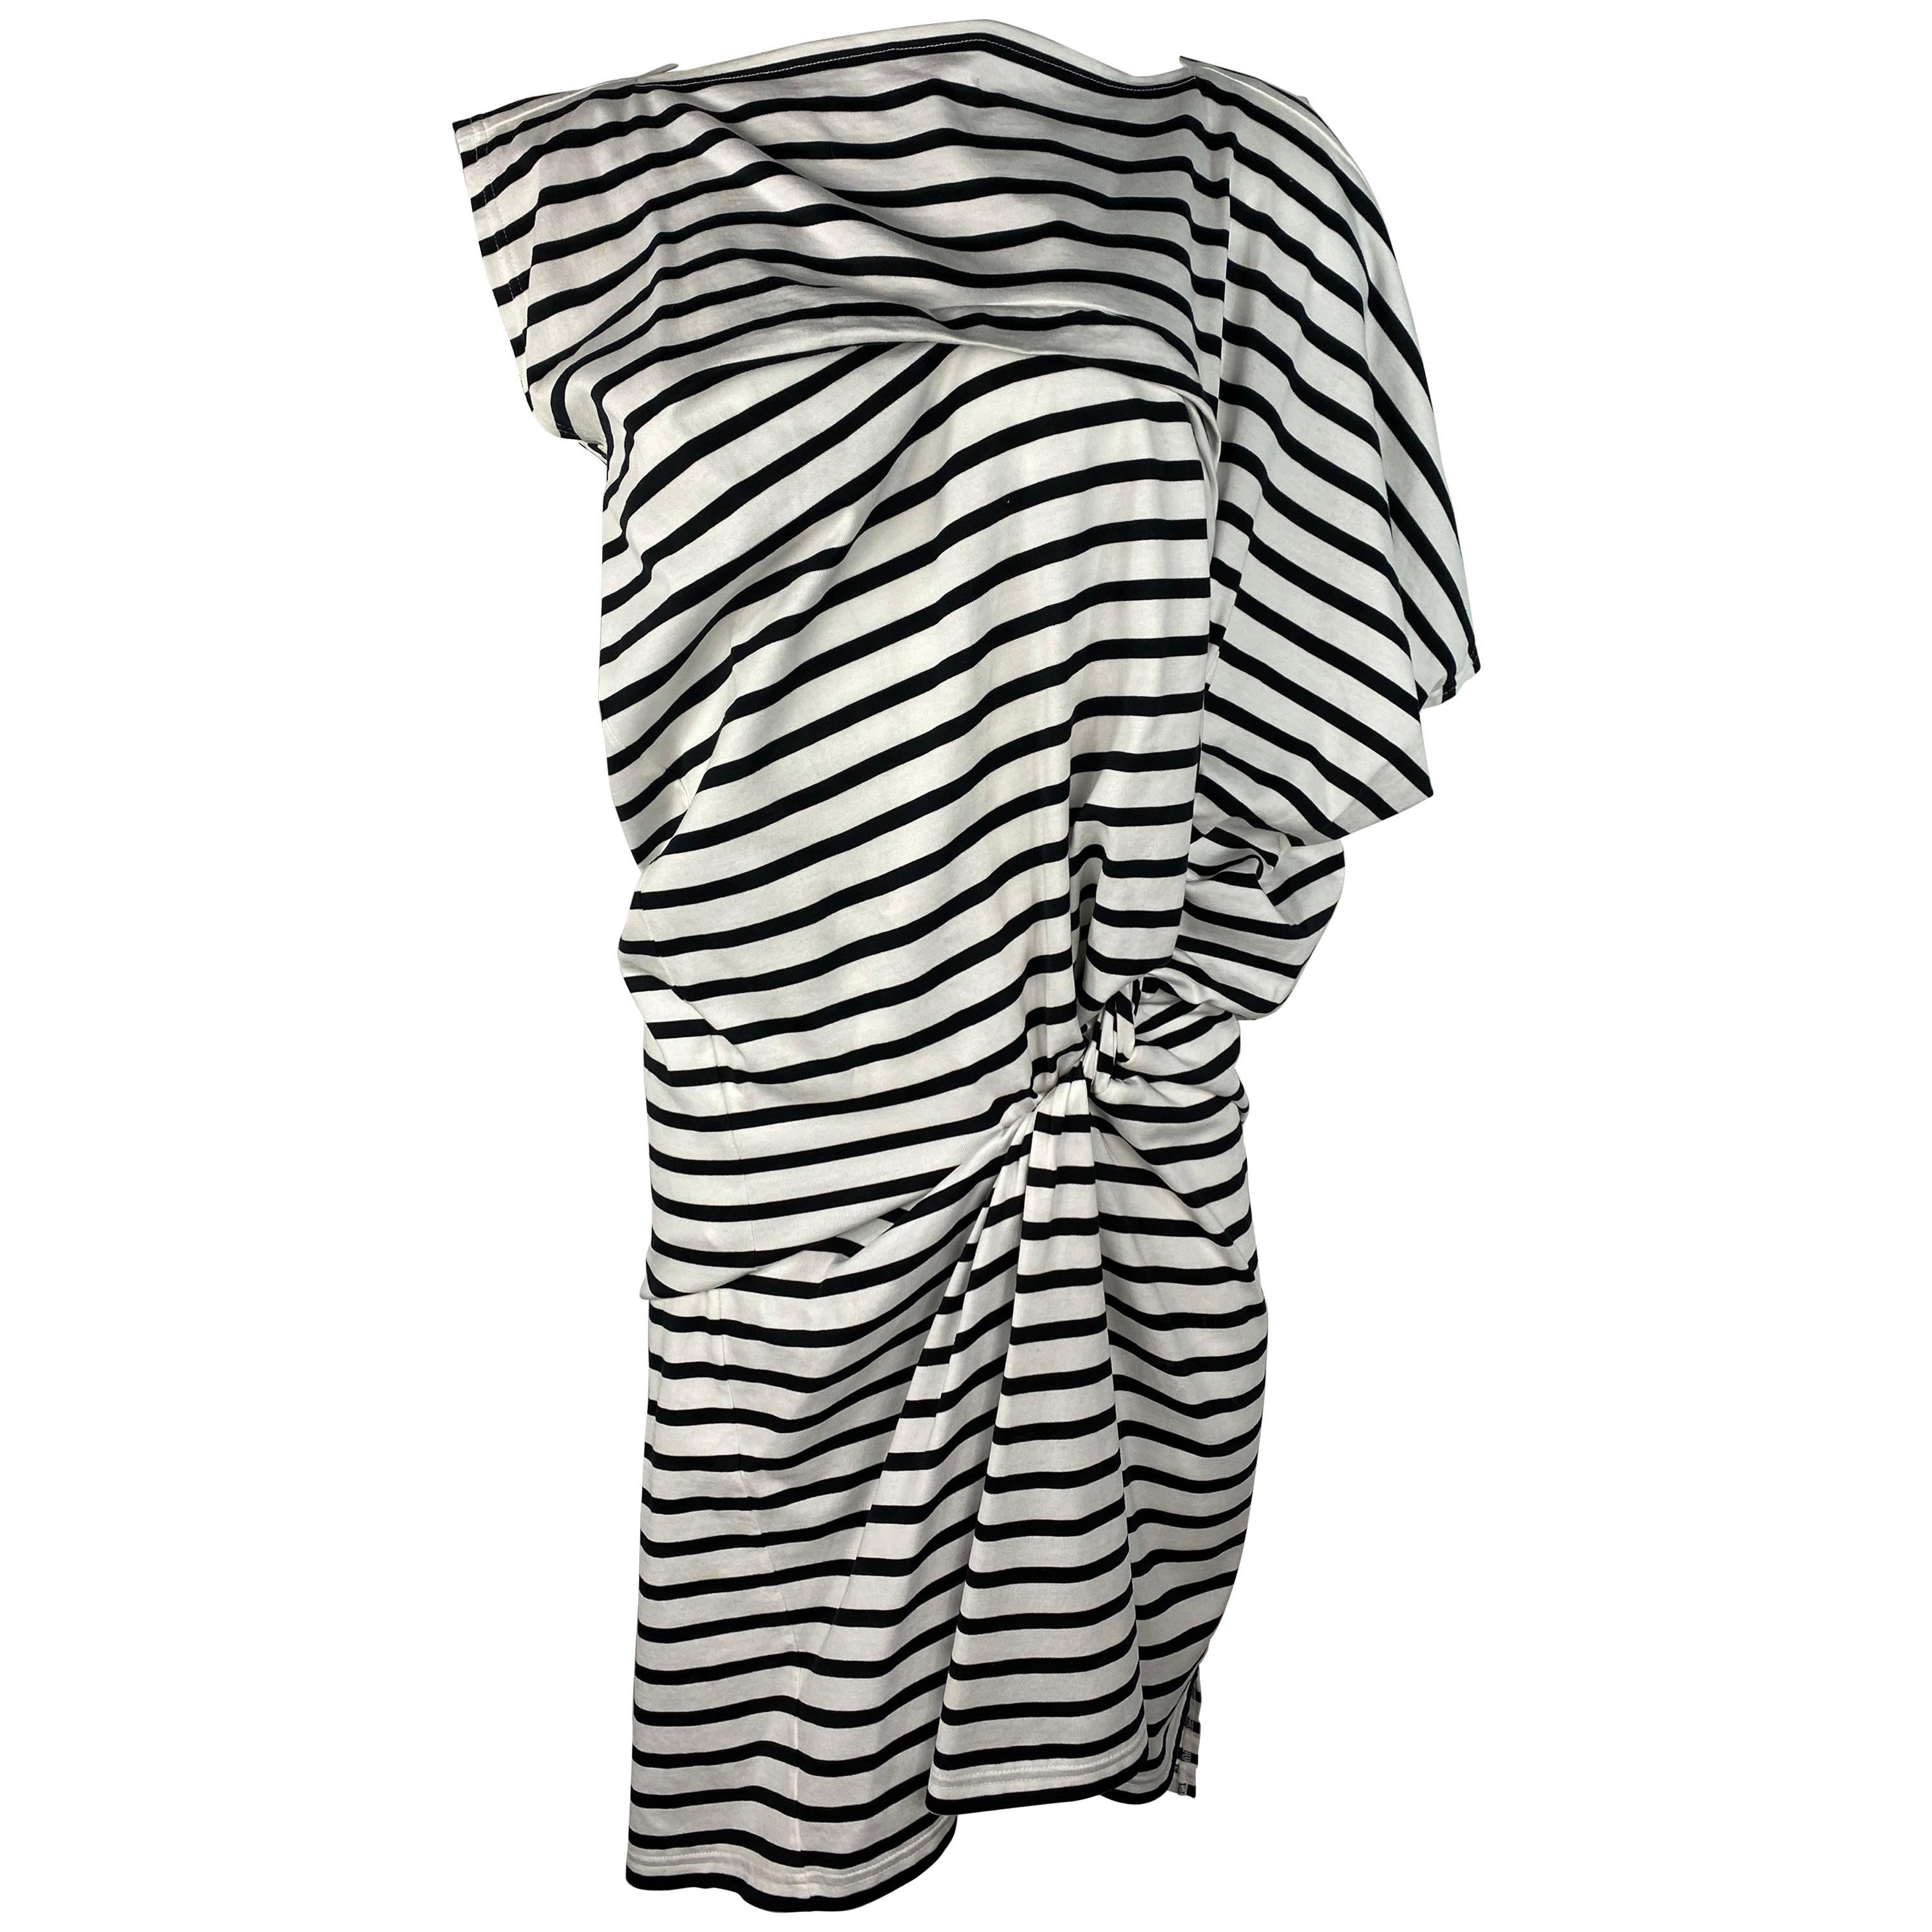 Junya Watanabe Comme Des Garcons Black and White Striped Mini Dress, Size S